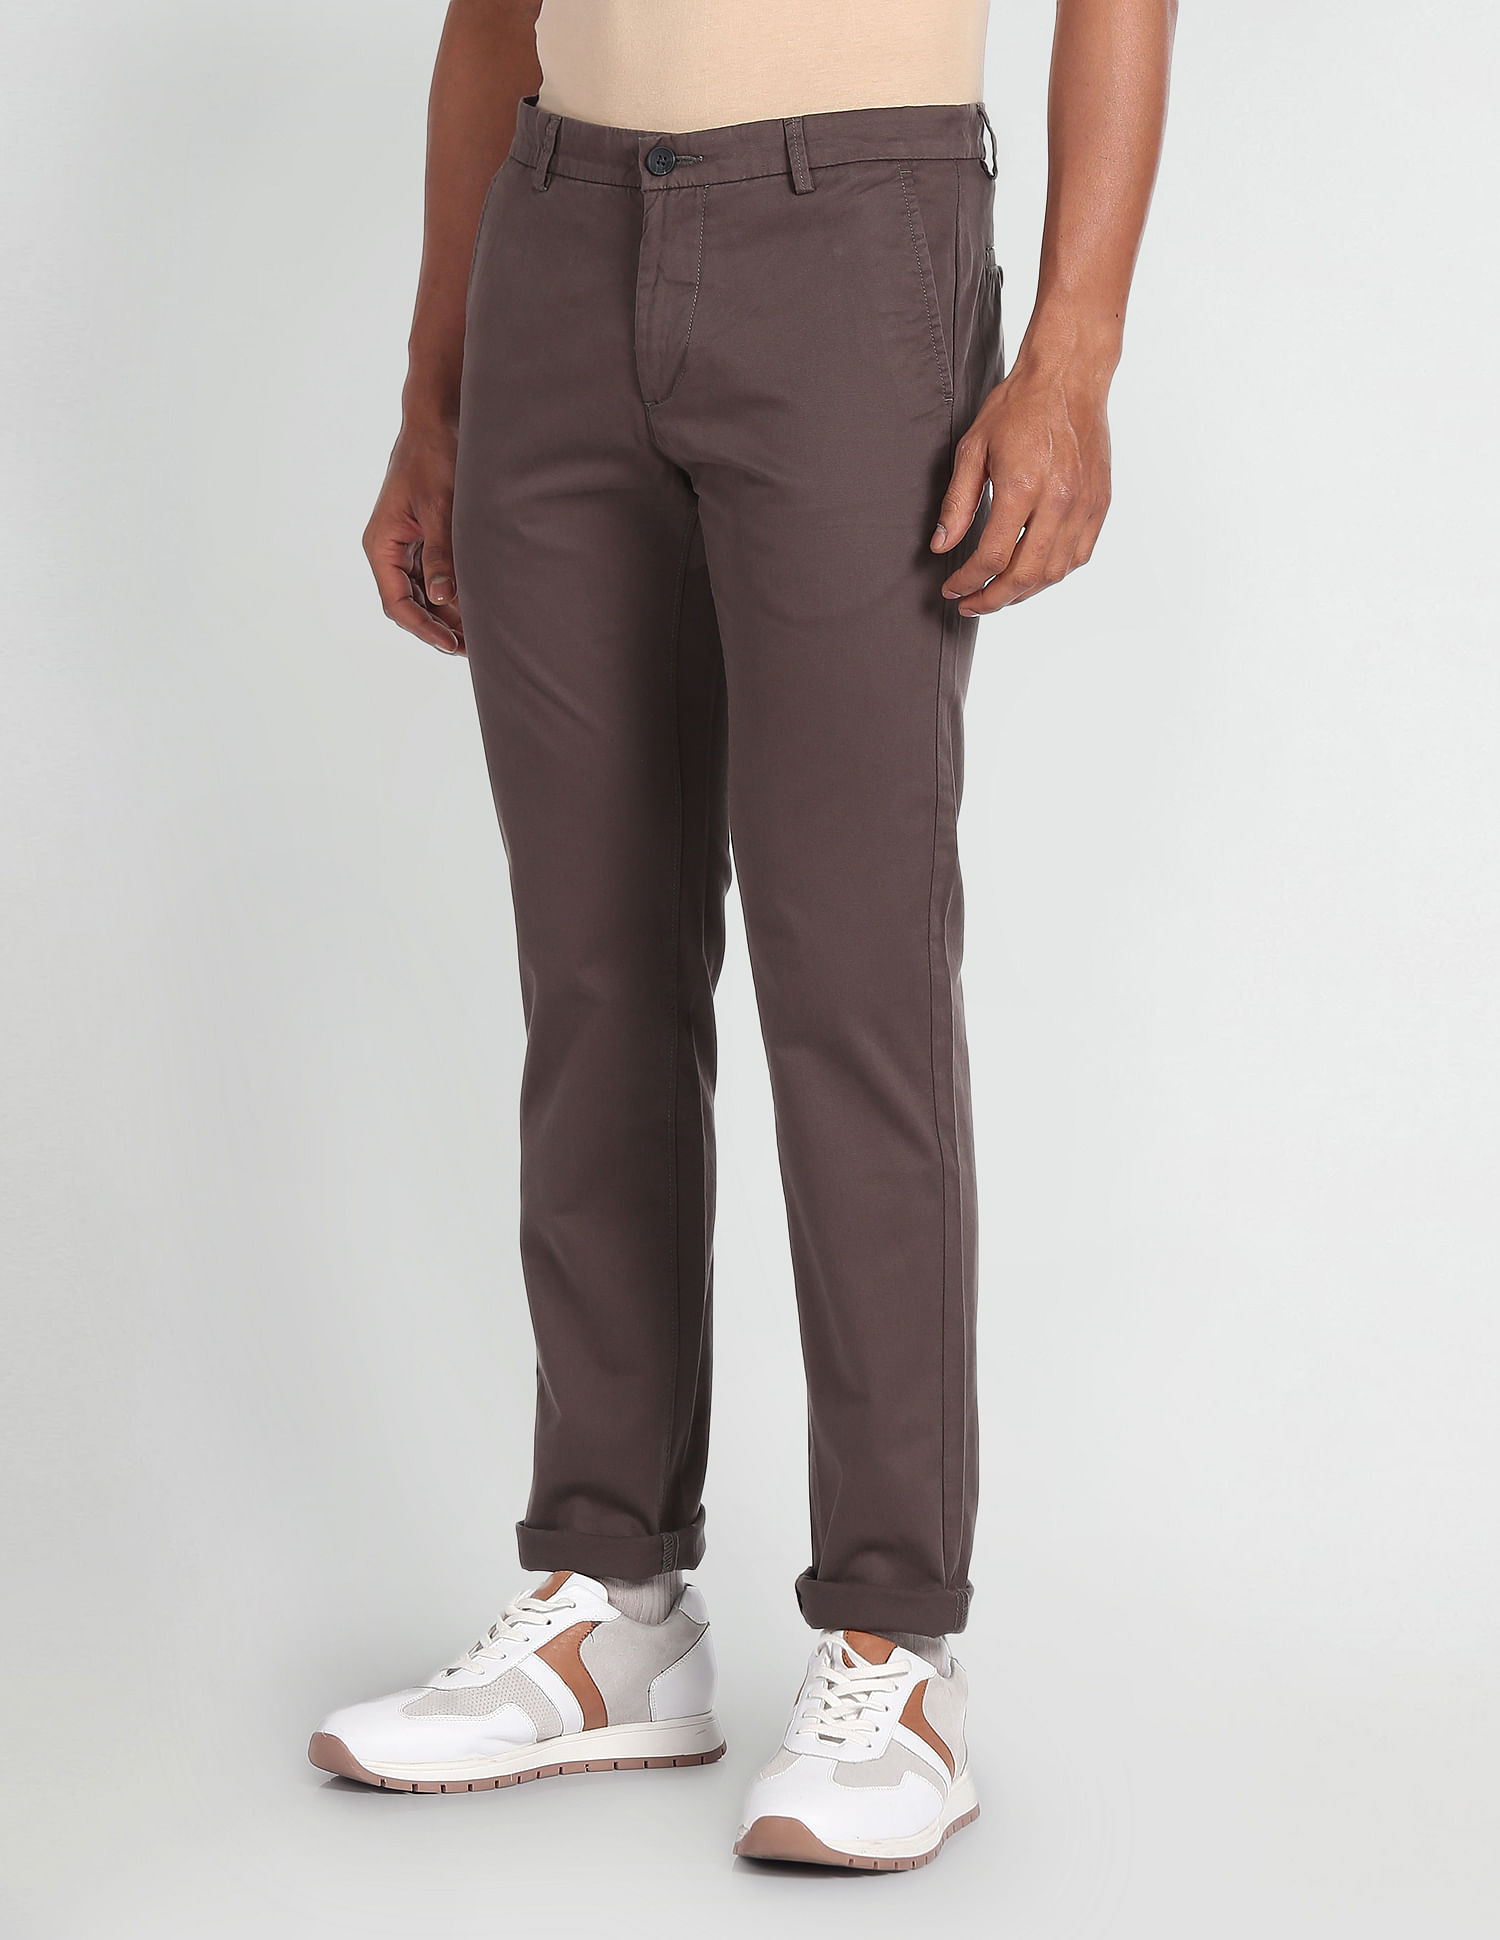 Buy Arrow Sports Bronson Slim Fit Printed Casual Trousers - NNNOW.com